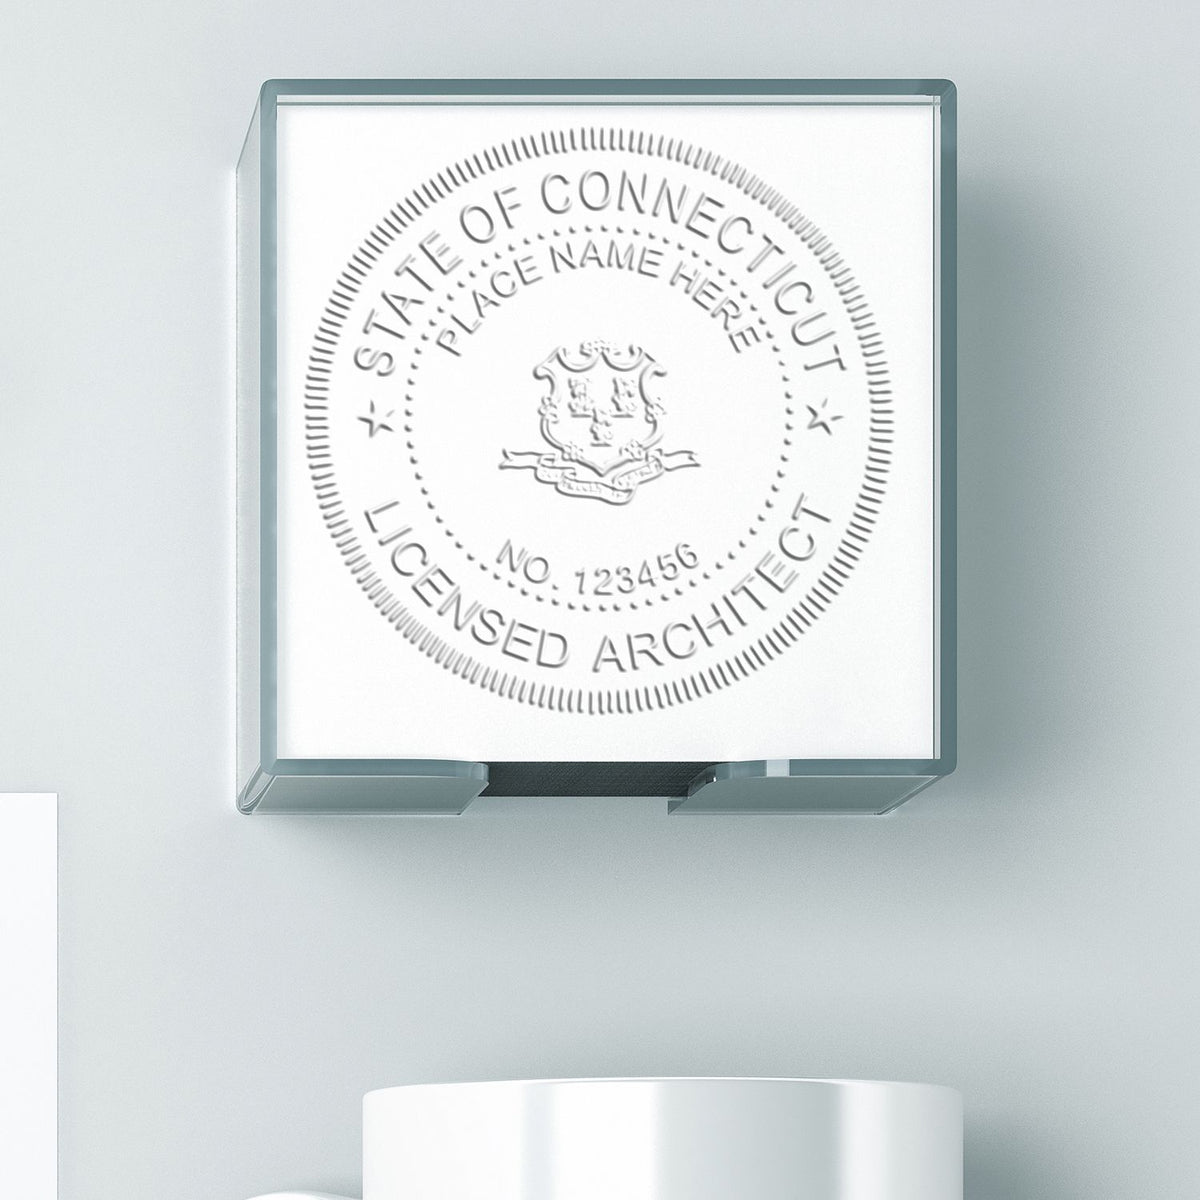 An alternative view of the Hybrid Connecticut Architect Seal stamped on a sheet of paper showing the image in use